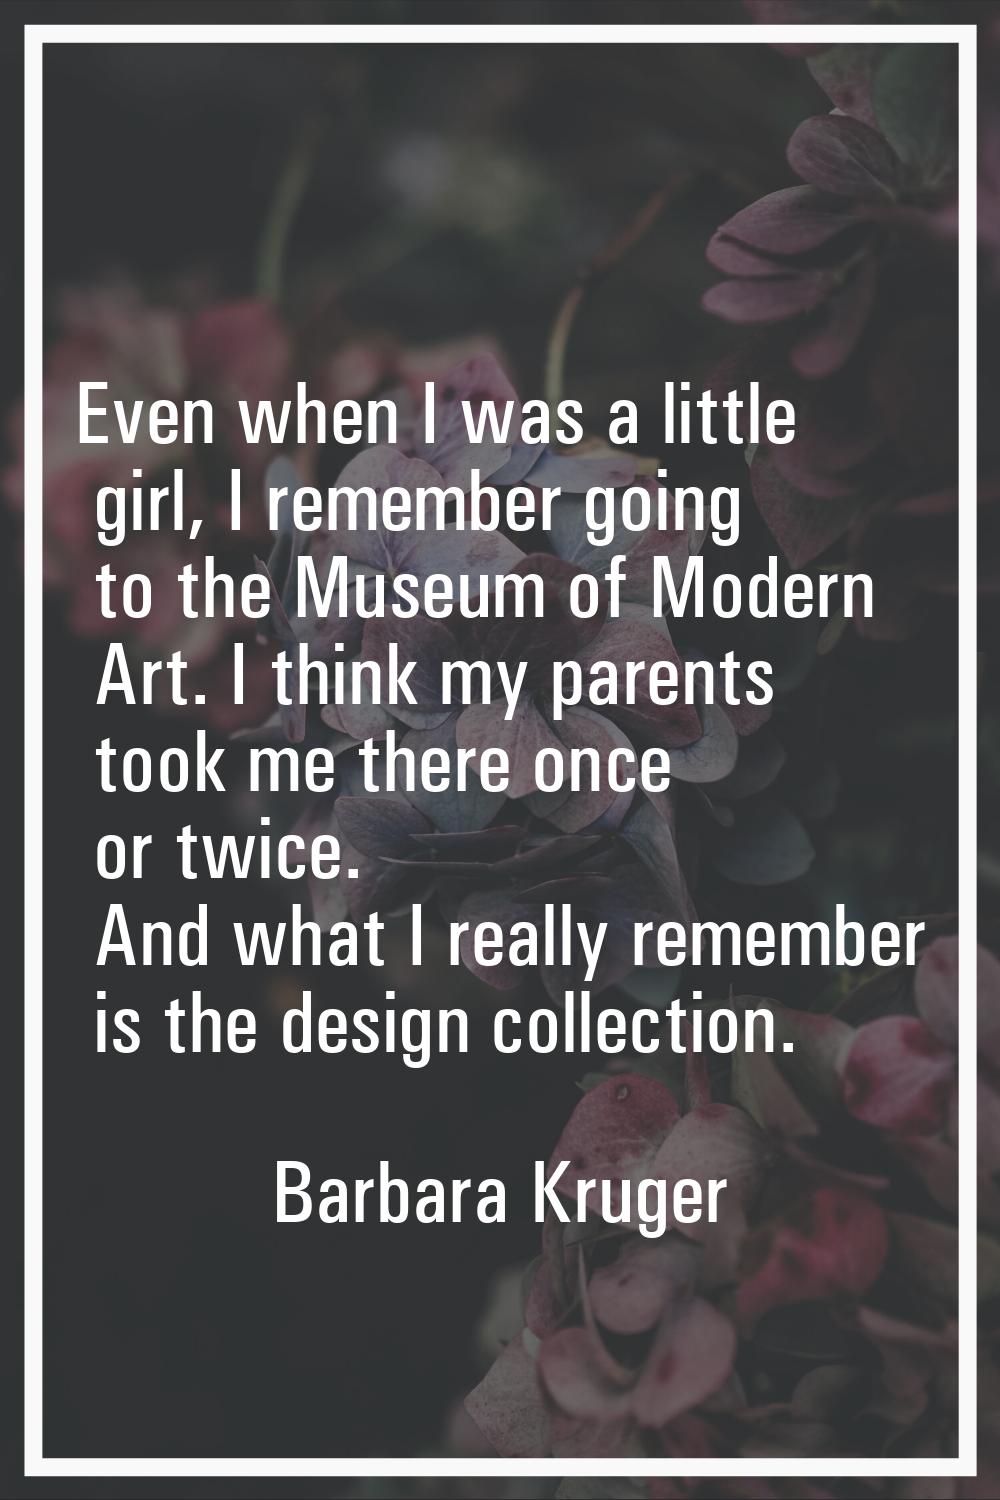 Even when I was a little girl, I remember going to the Museum of Modern Art. I think my parents too